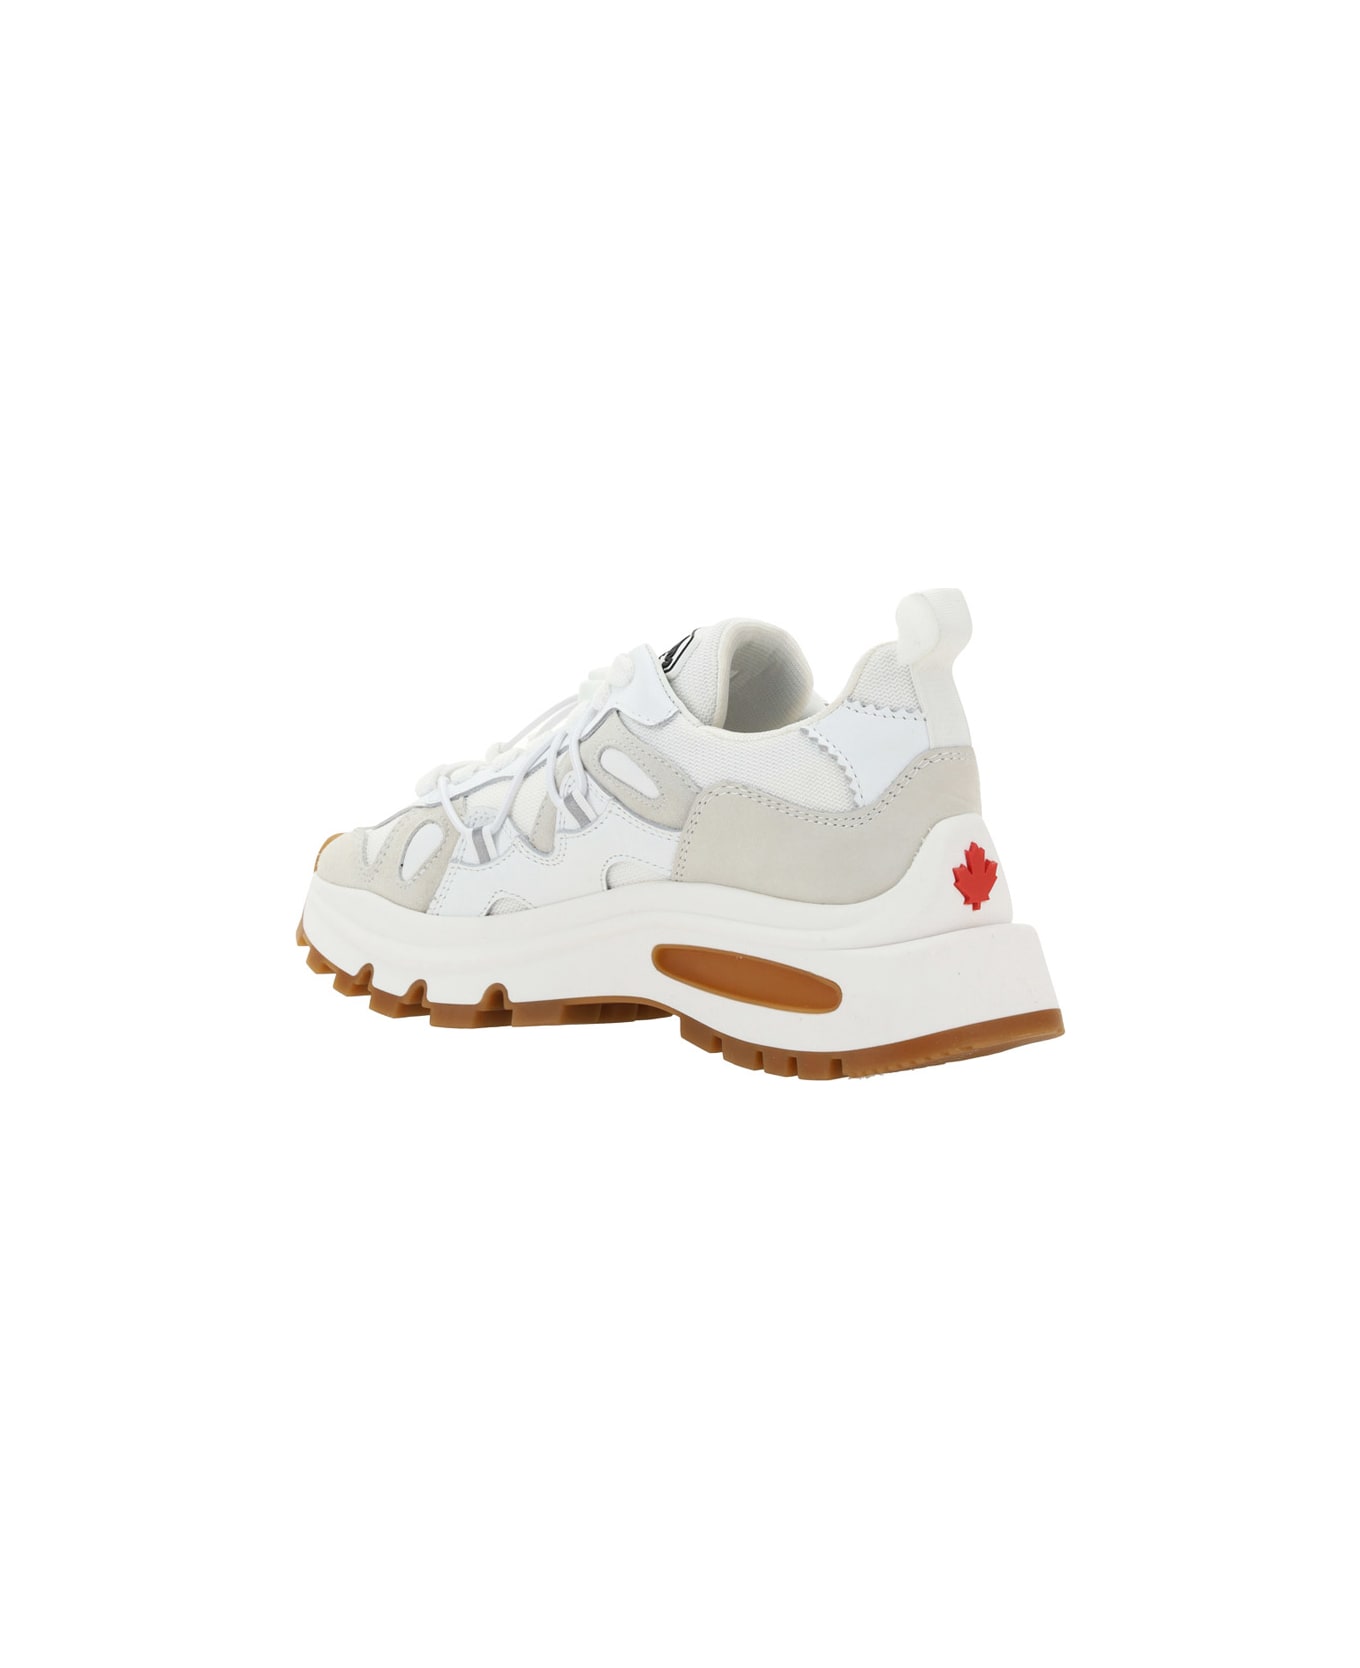 Dsquared2 Run Ds2 Sneakers - White